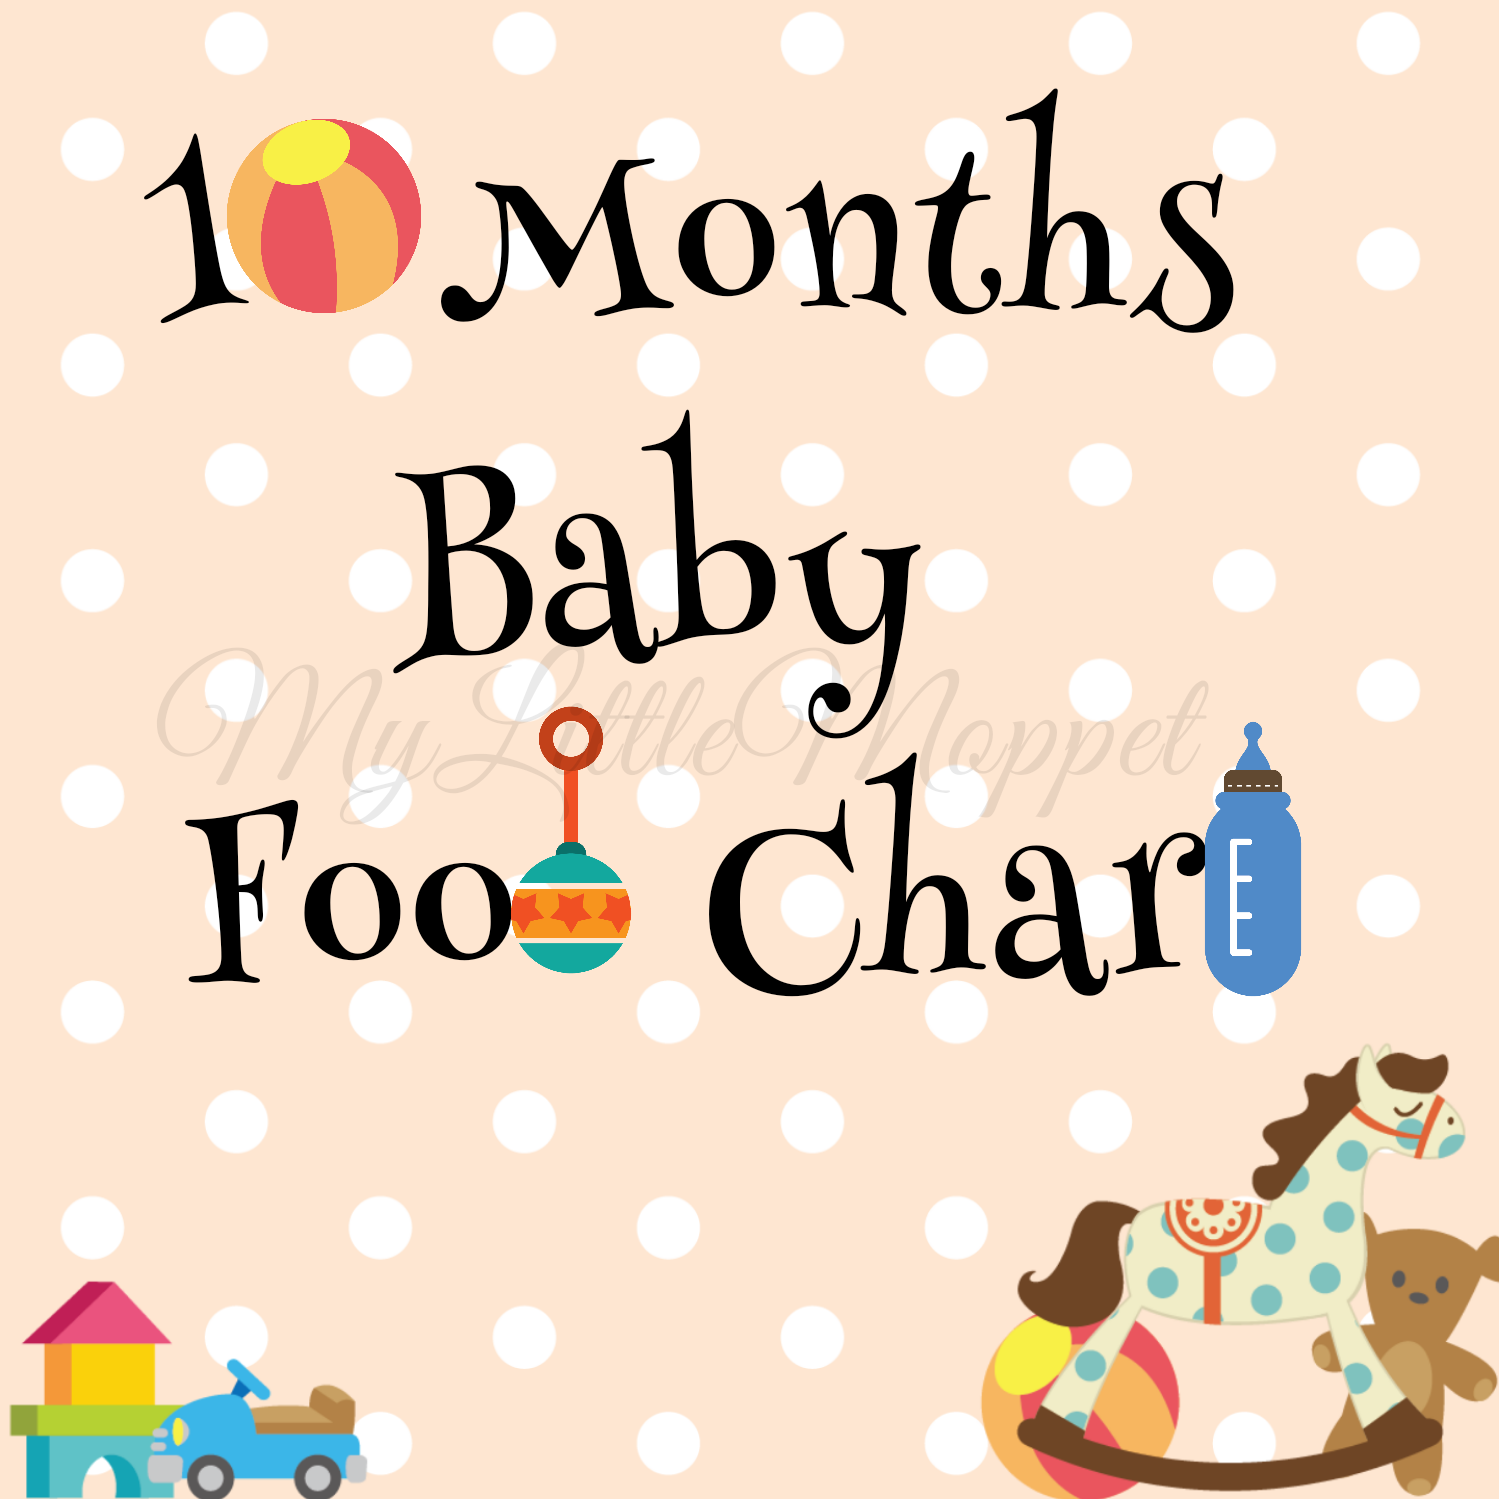 Diet Chart For 10 Months Old Baby